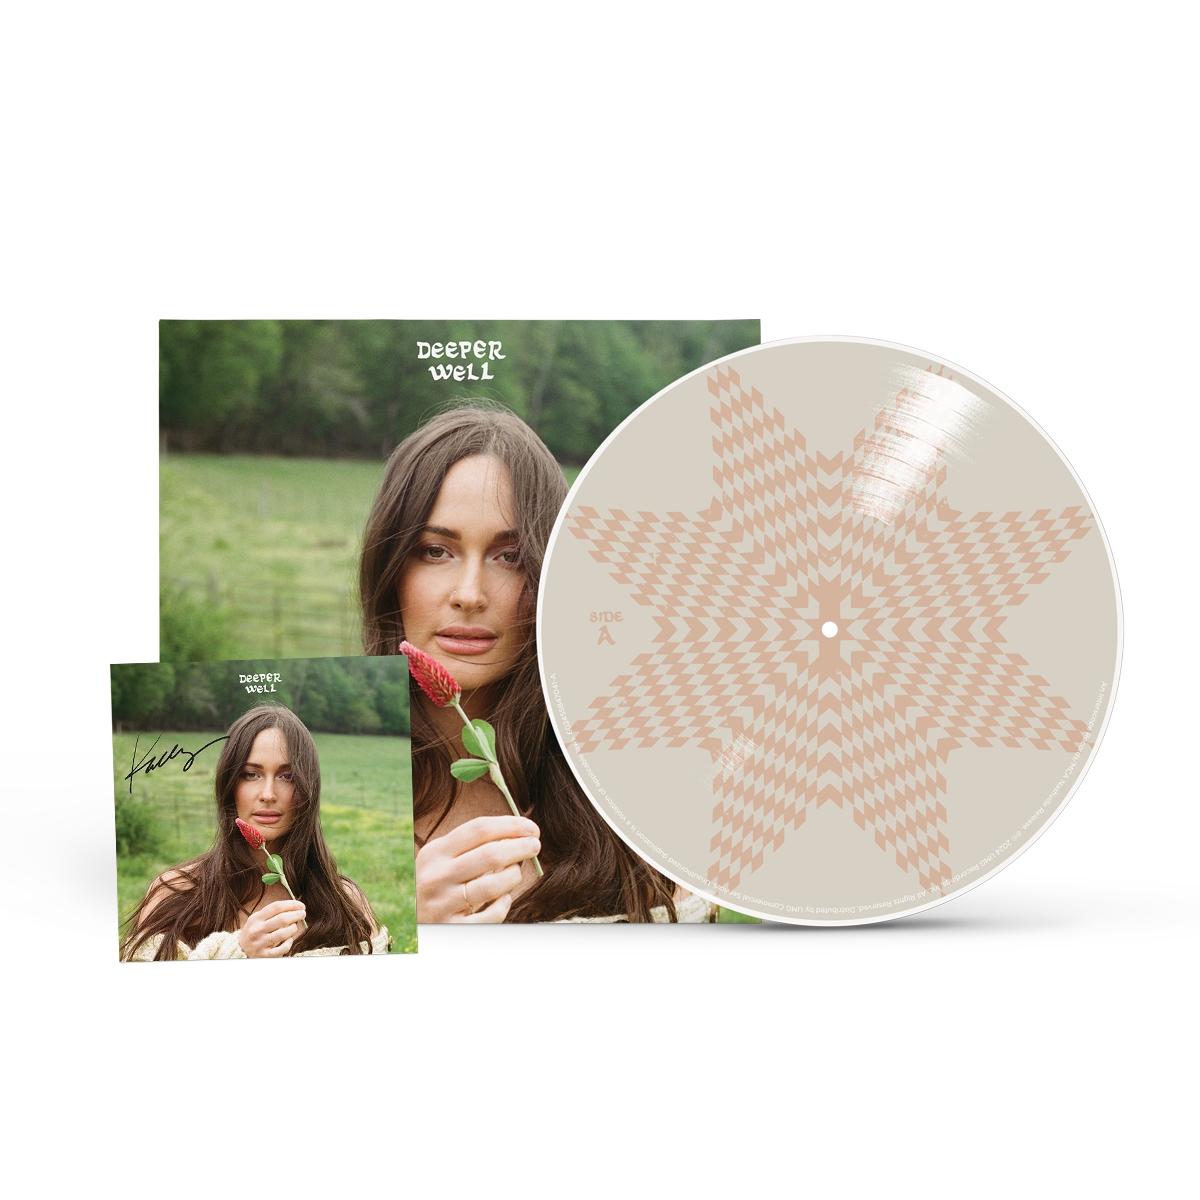 Deeper Well Quilted Picture Disc Vinyl (Limited Collector’s Edition) + Signed Art Card